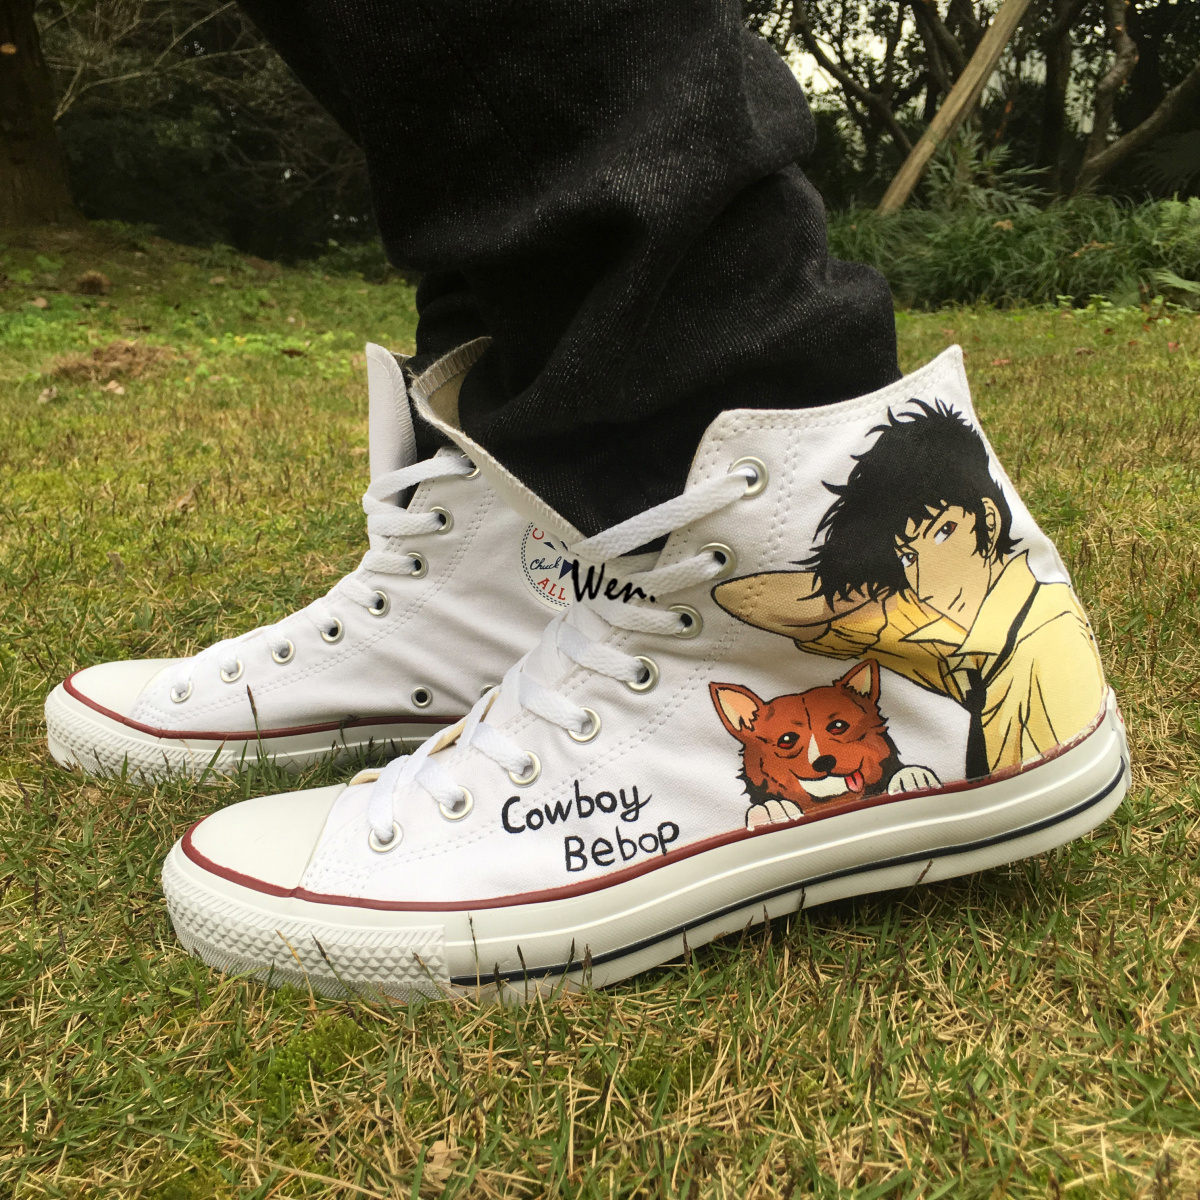 Anime Spike Spiegel Cowboy Bebop Design Converse All Star Hand Painted Shoes